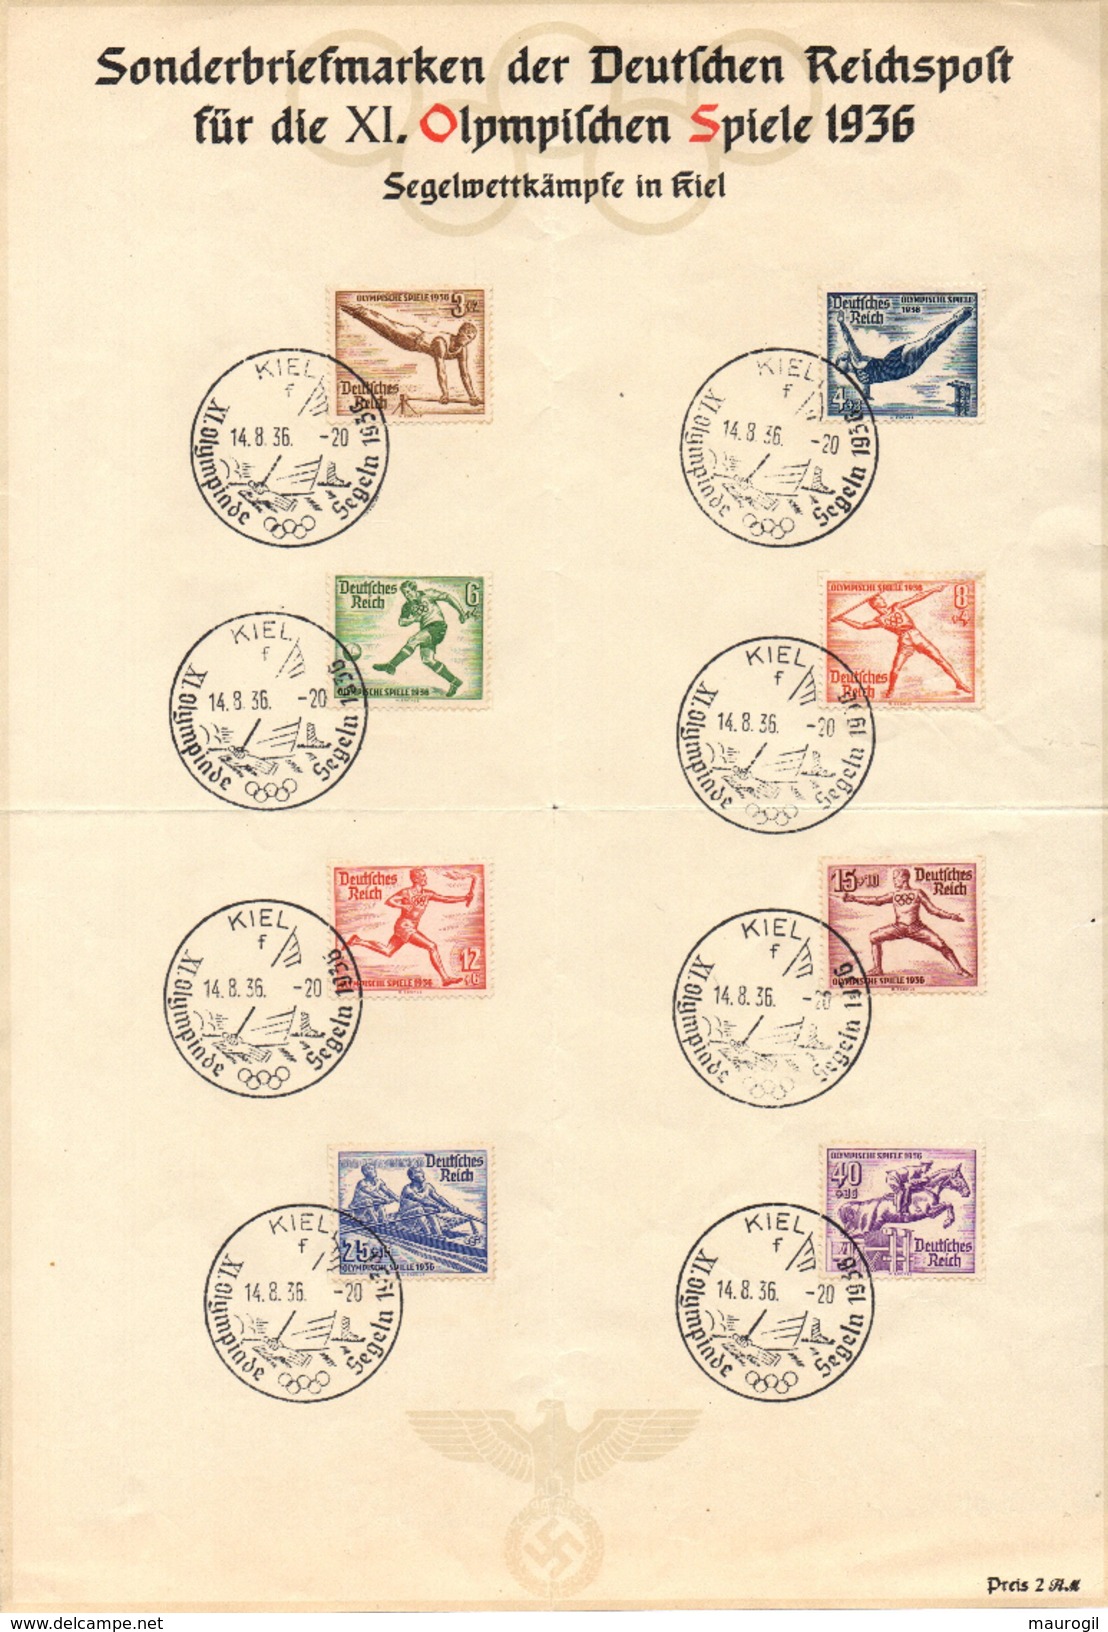 GERMANY KIEL 14/8/36 - OLYMPIC GAMES BERLIN 1936 - SAILING - SHEET WITH COMPLETE STAMPS OLYMPIC SERIES - Sommer 1936: Berlin